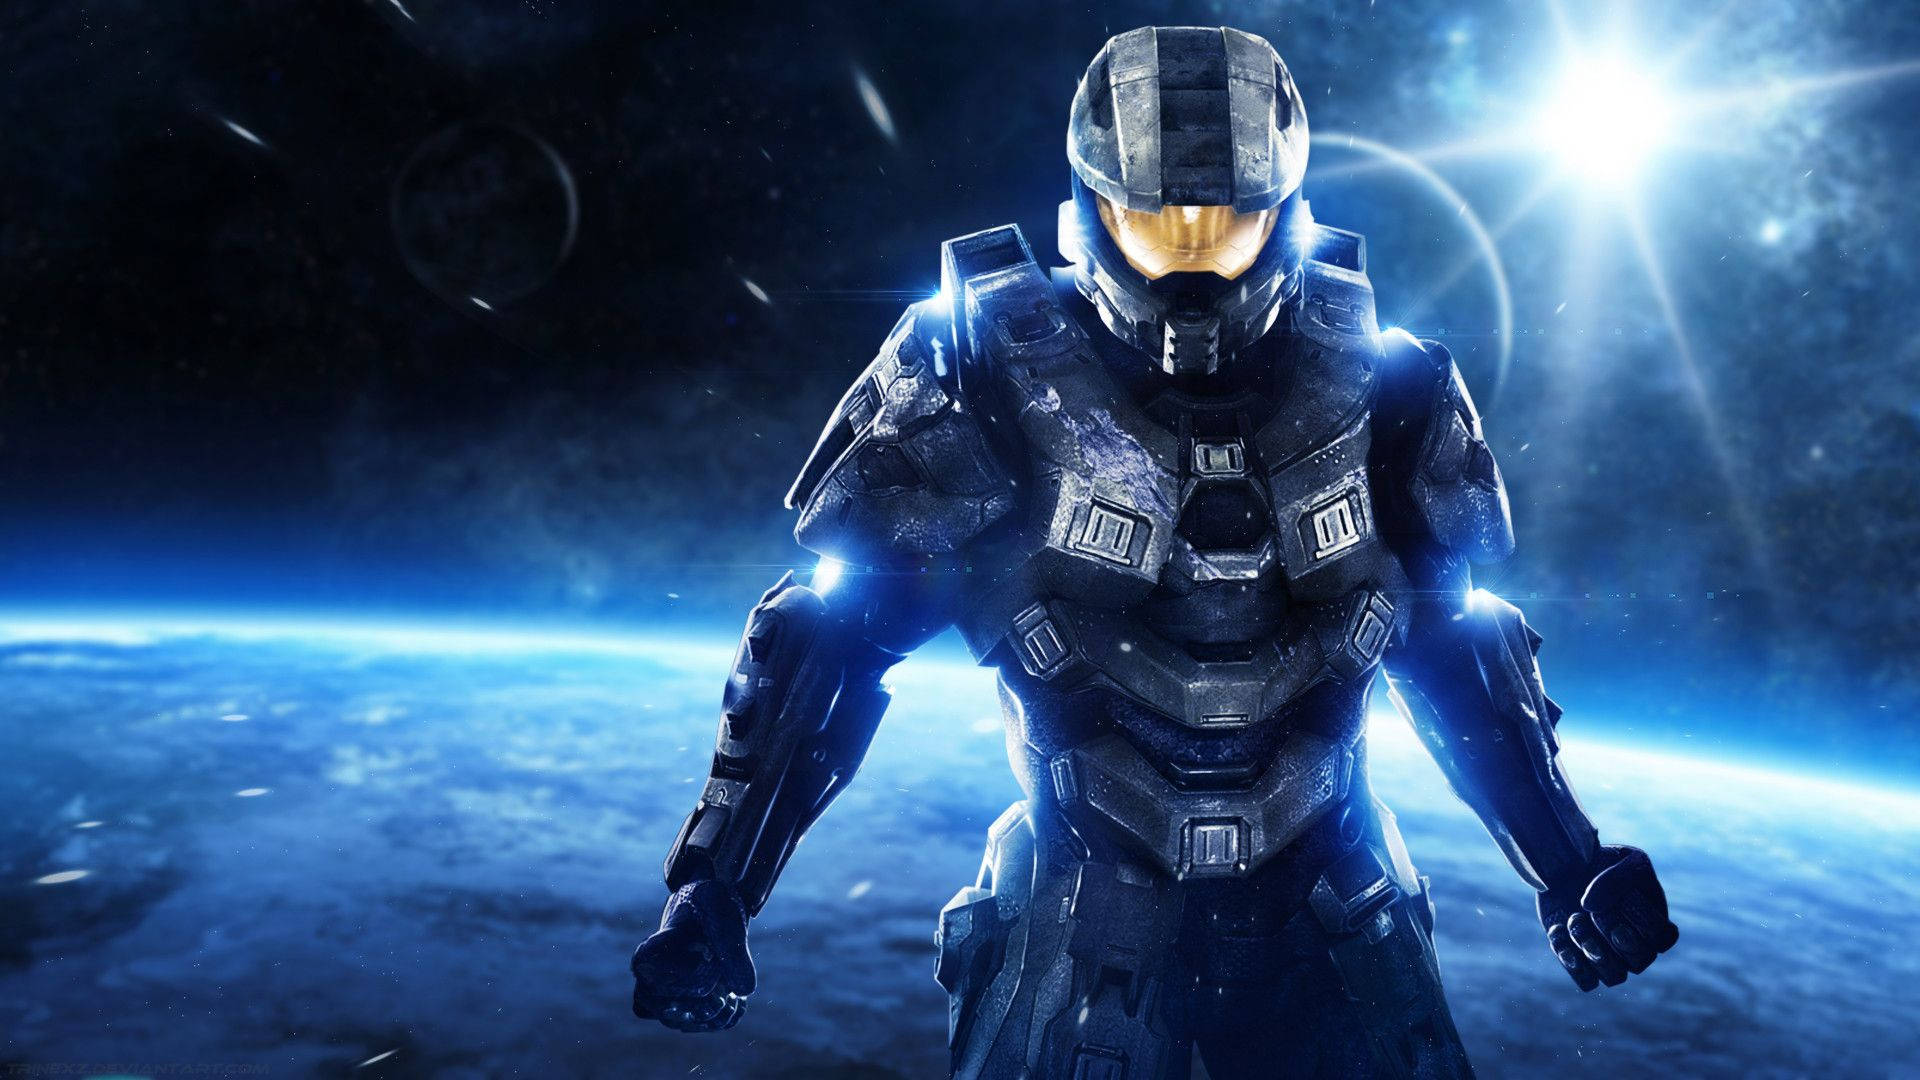 Cool Master Chief In Space